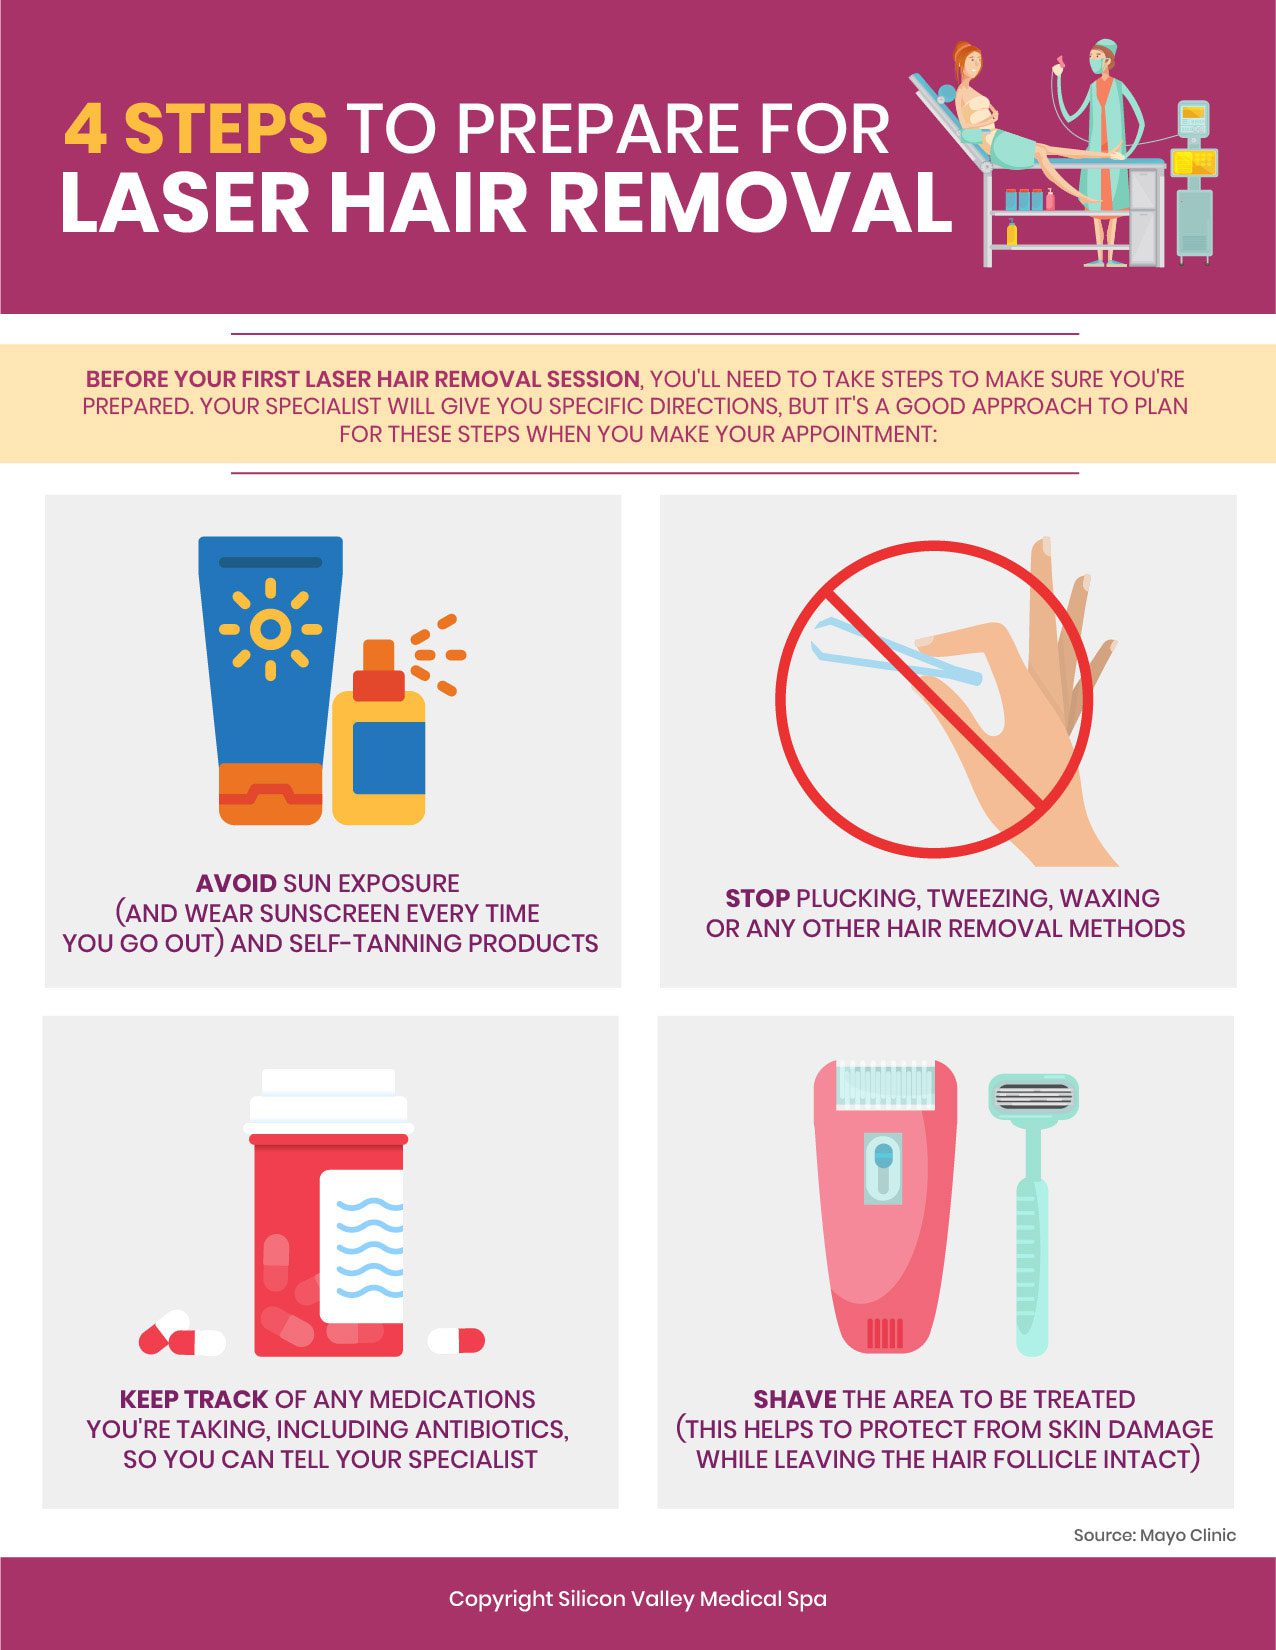 prepare for laser hair removal - an infographic showing how to prepare for a treatment